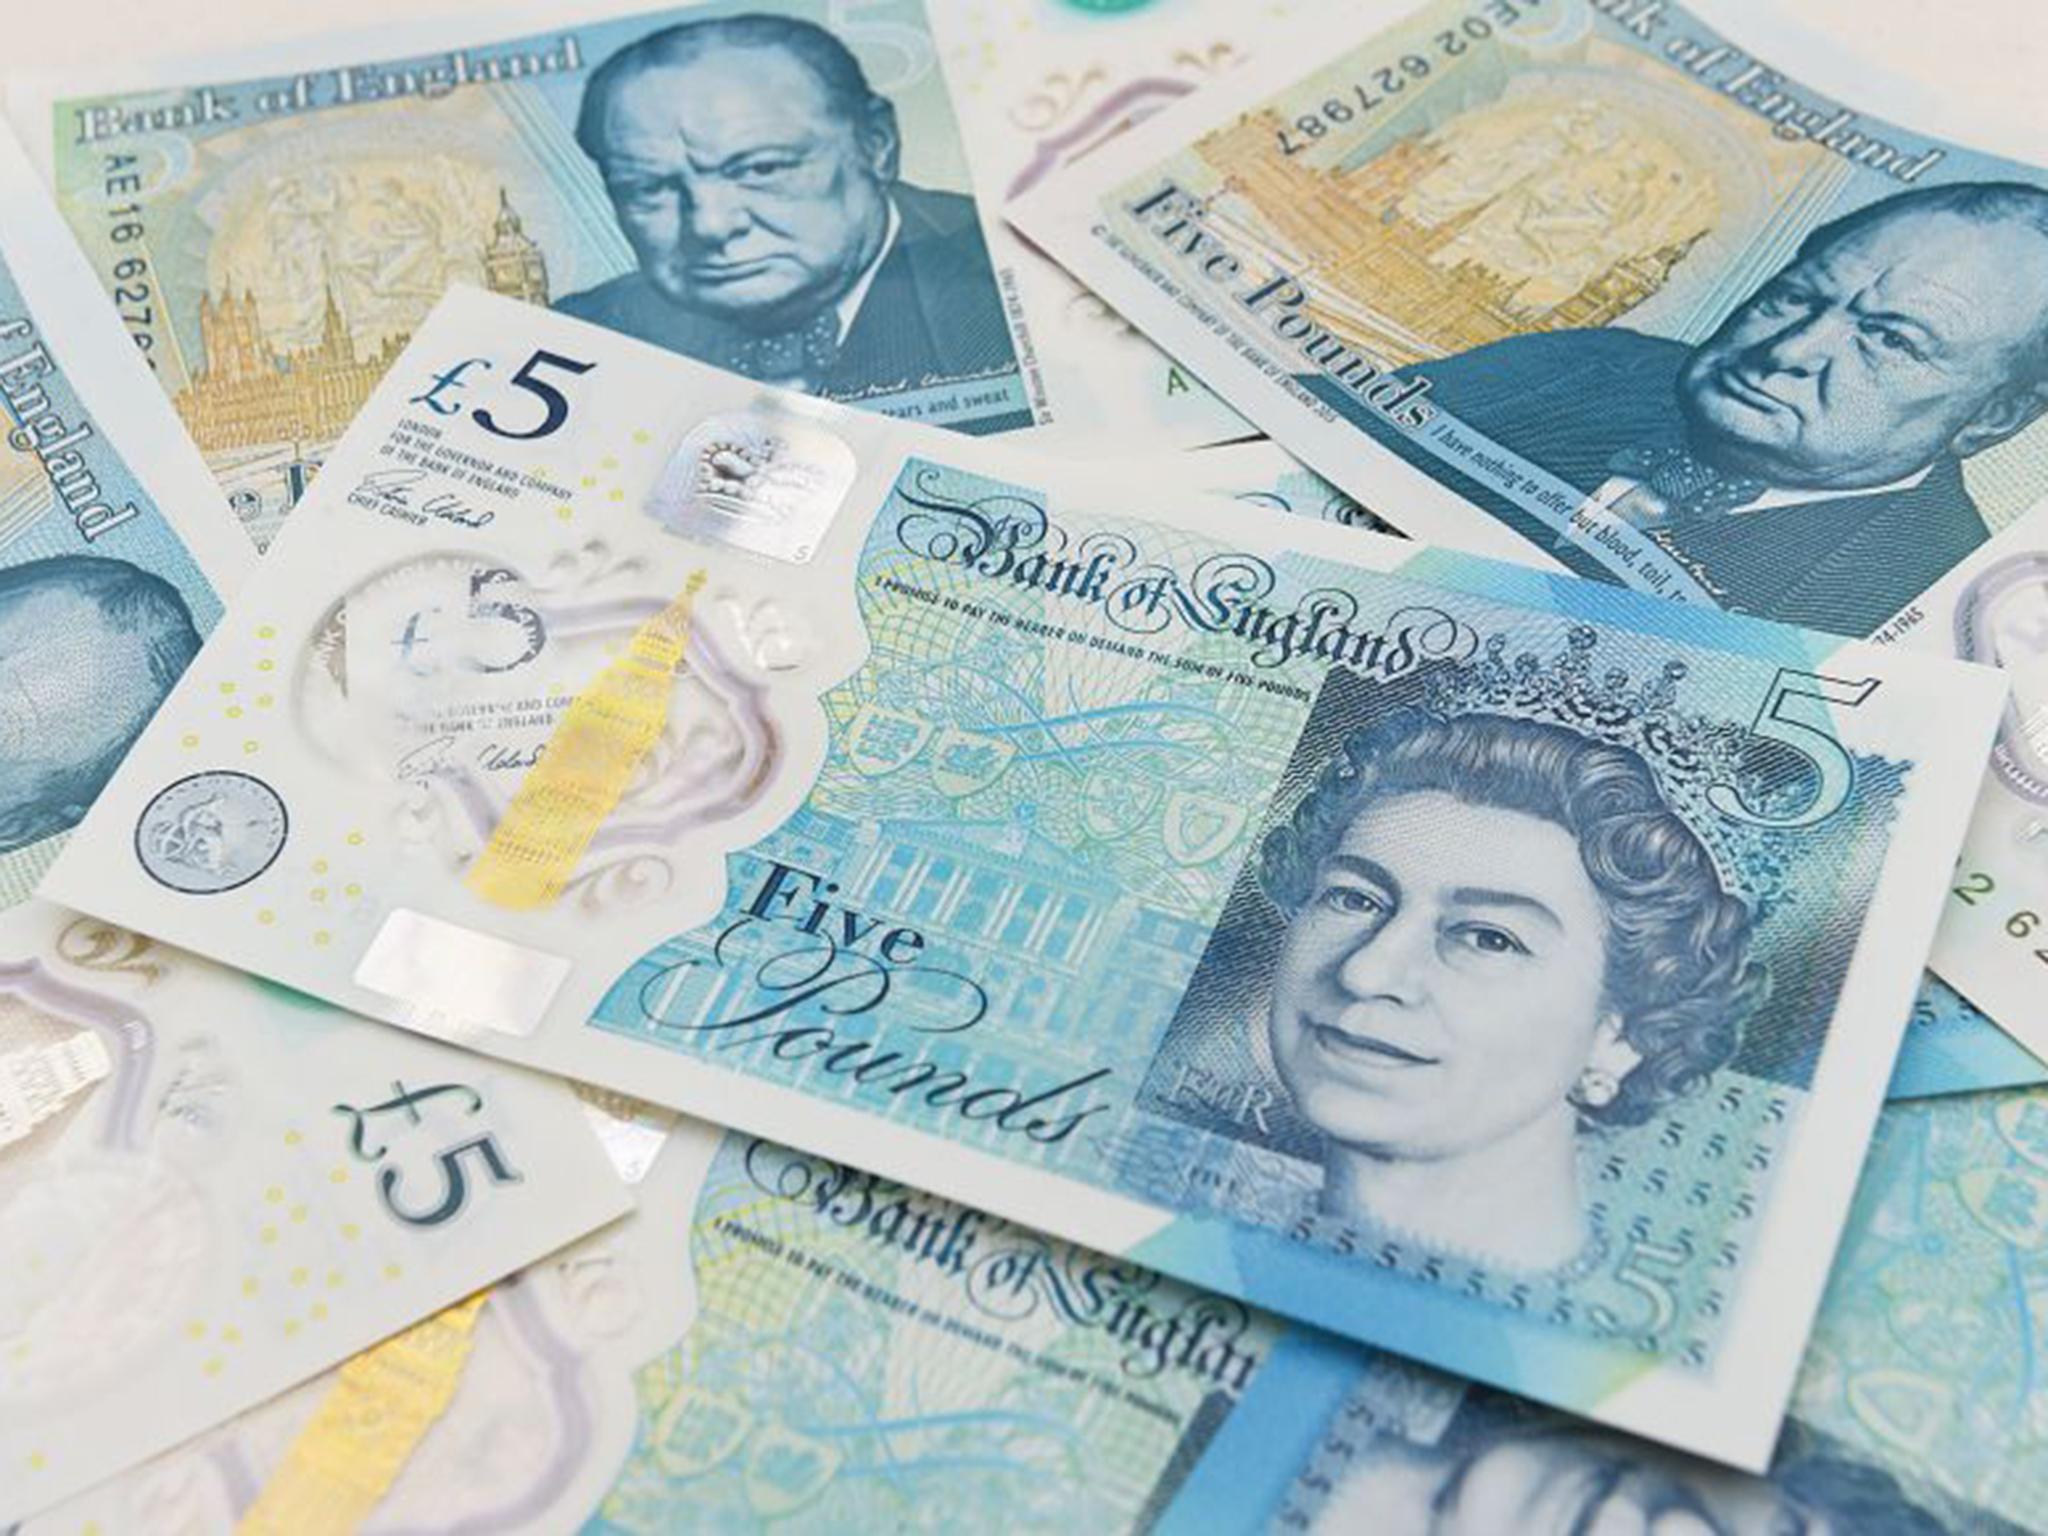 The Bank of England is looking at ways of removing the trace amounts of animal fat used during the production of the new £5 note